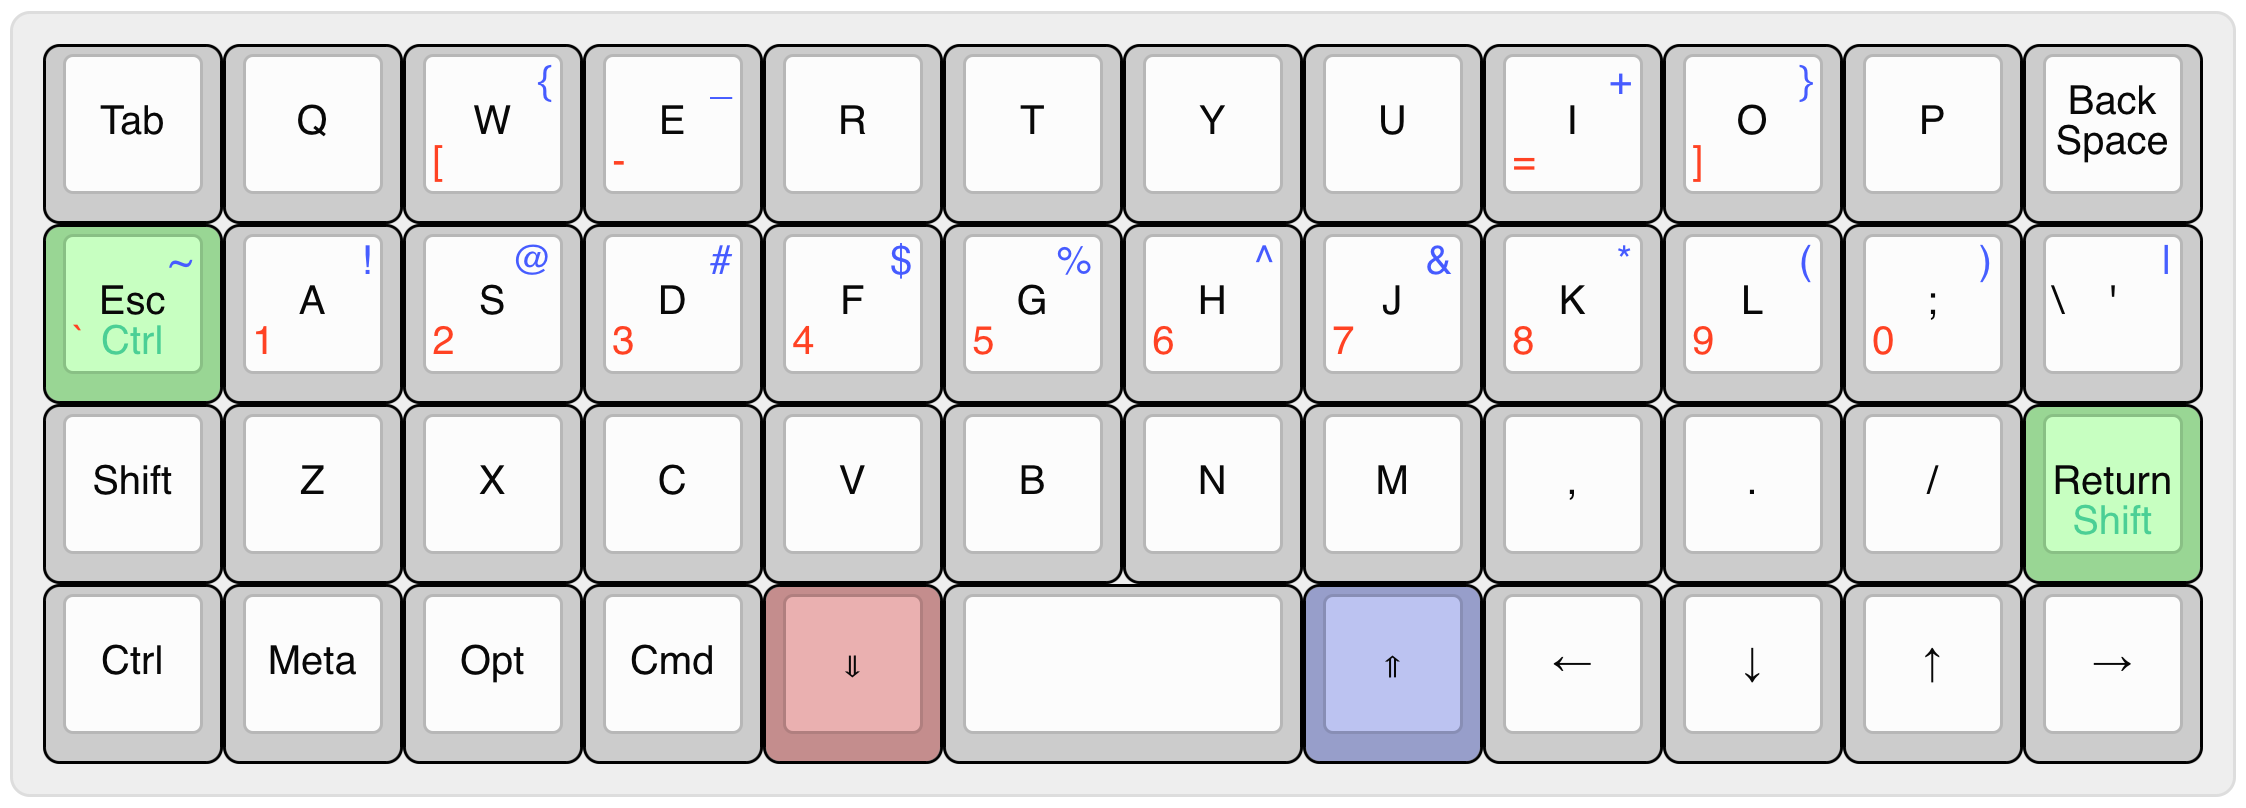 Down the Rabbit Hole of Tiny Keyboards